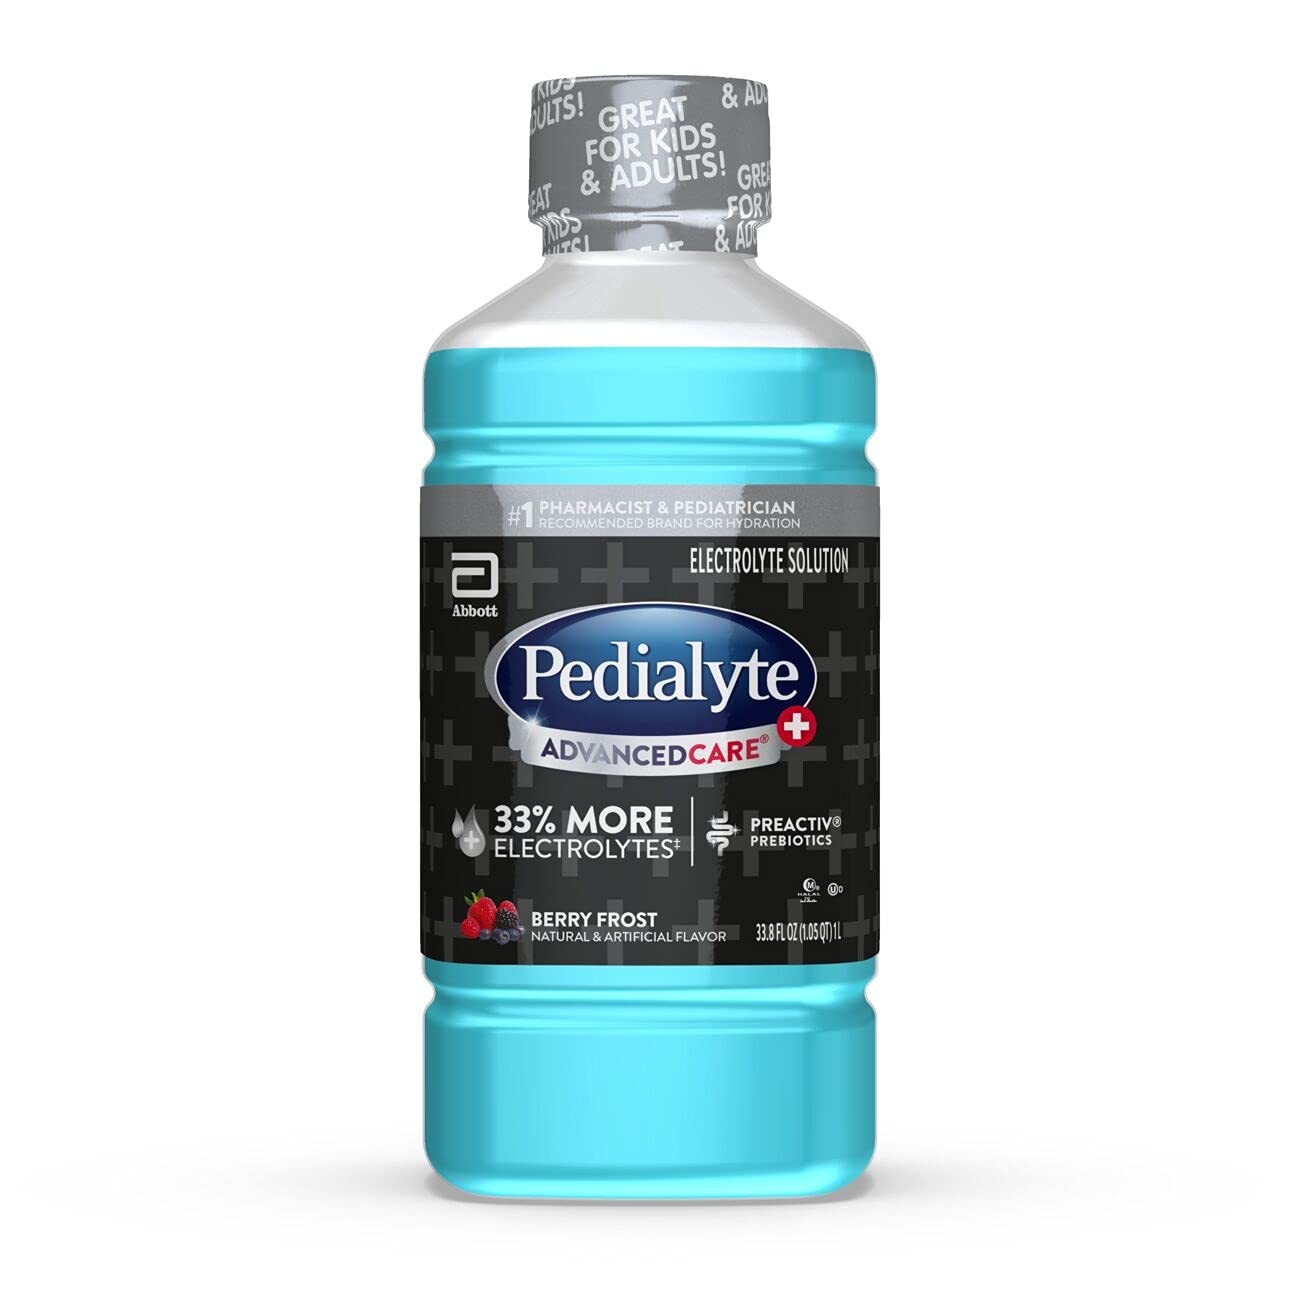 Pedialyte Advanced Care Electrolyte Solution, Berry Frost, 33.8oz